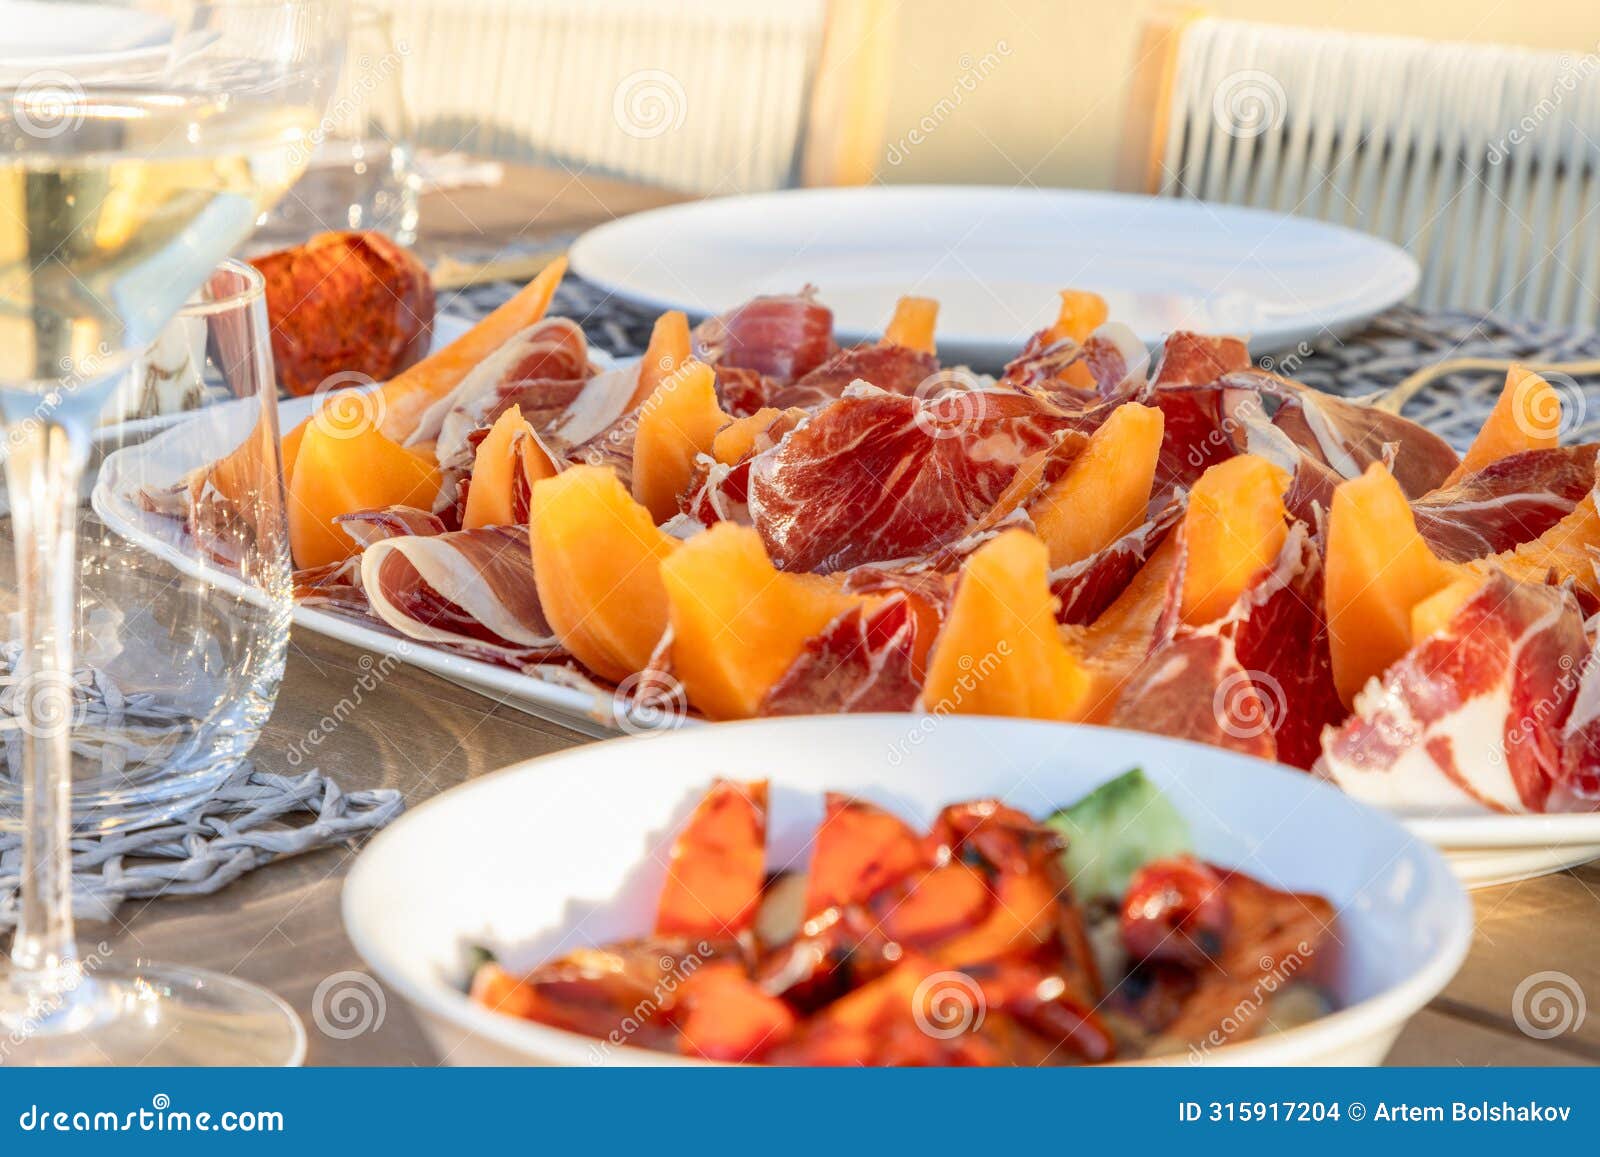 an italian alfresco dining setting, featuring a plate of prosciutto paired with sweet melon slices